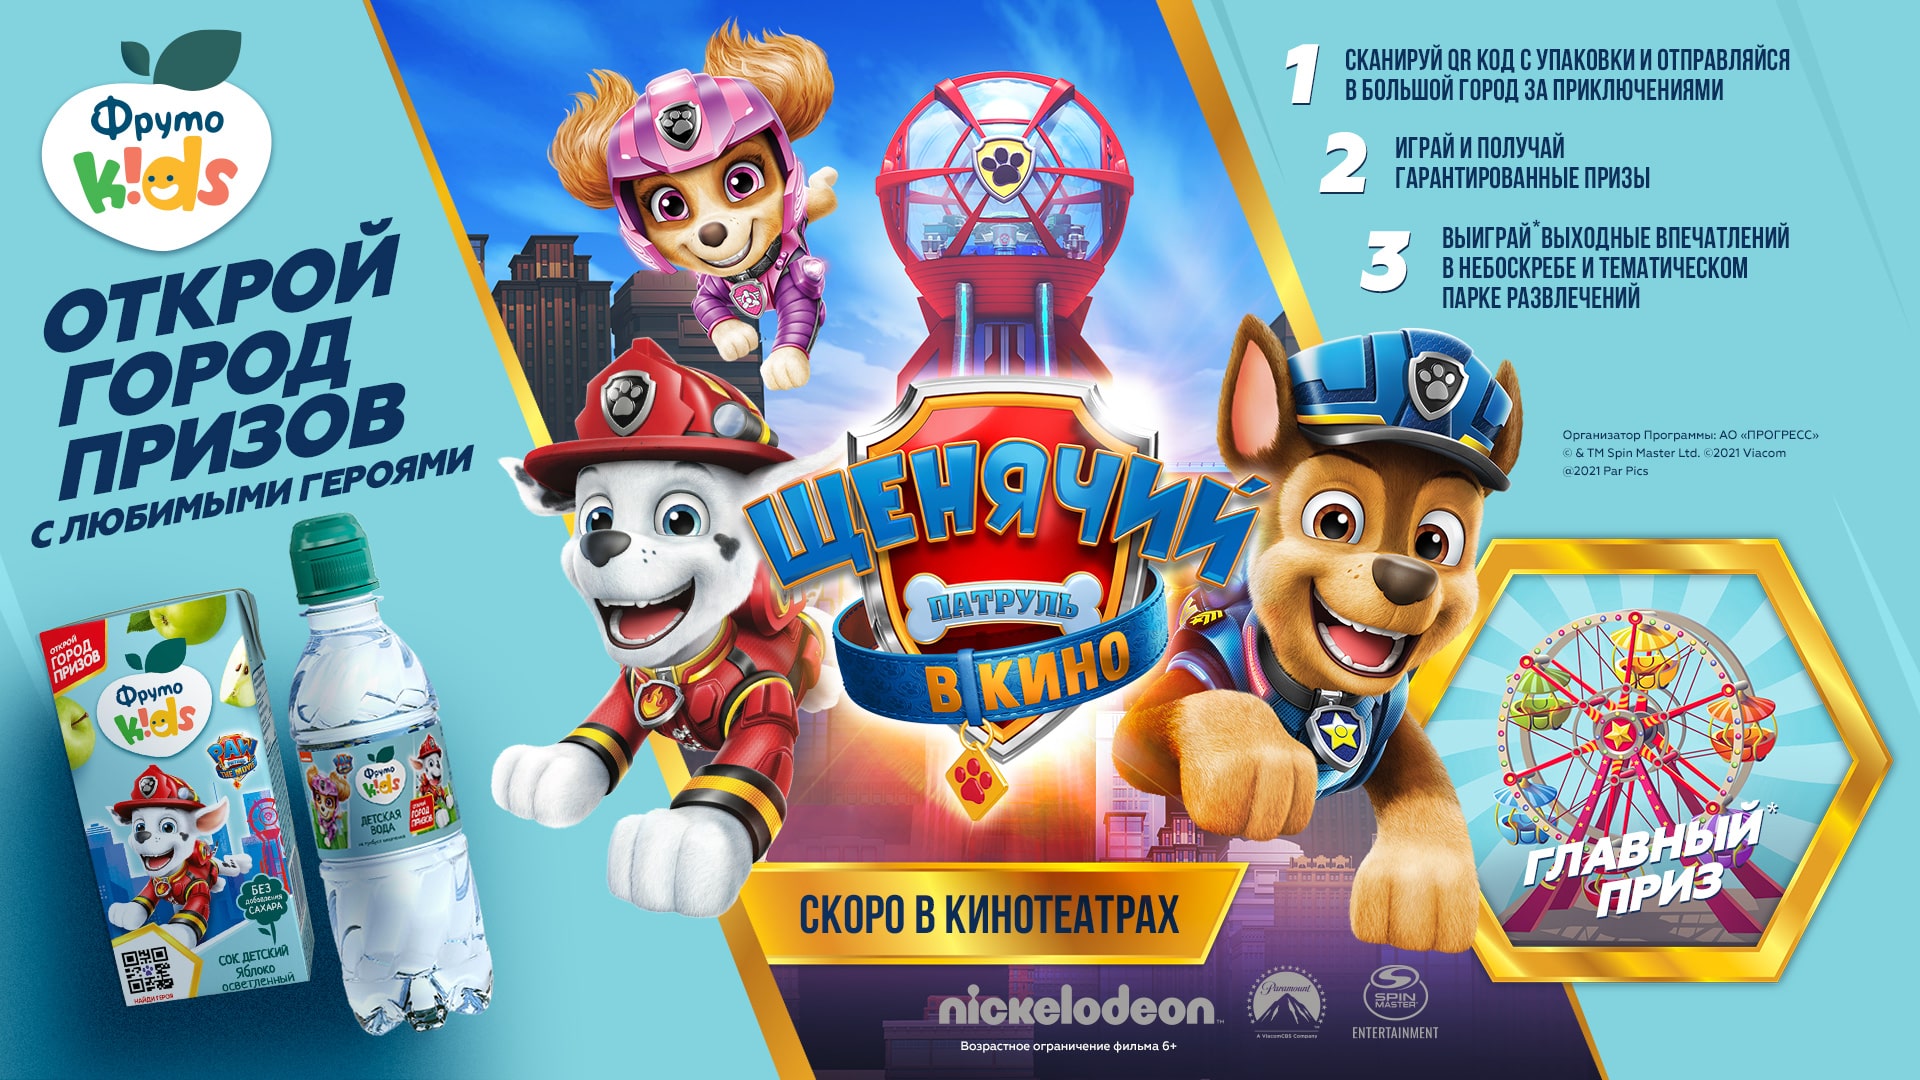 FRUTOKIDS REDESIGN THEIR PORTFOLIO FEATURING PAW PATROL: THE MOVIE & LAUNCH NATIONAL CAMPAIGN “DISCOVERING THE CITY OF PRIZES WITH OUR FAVOURITE CHARACTERS”